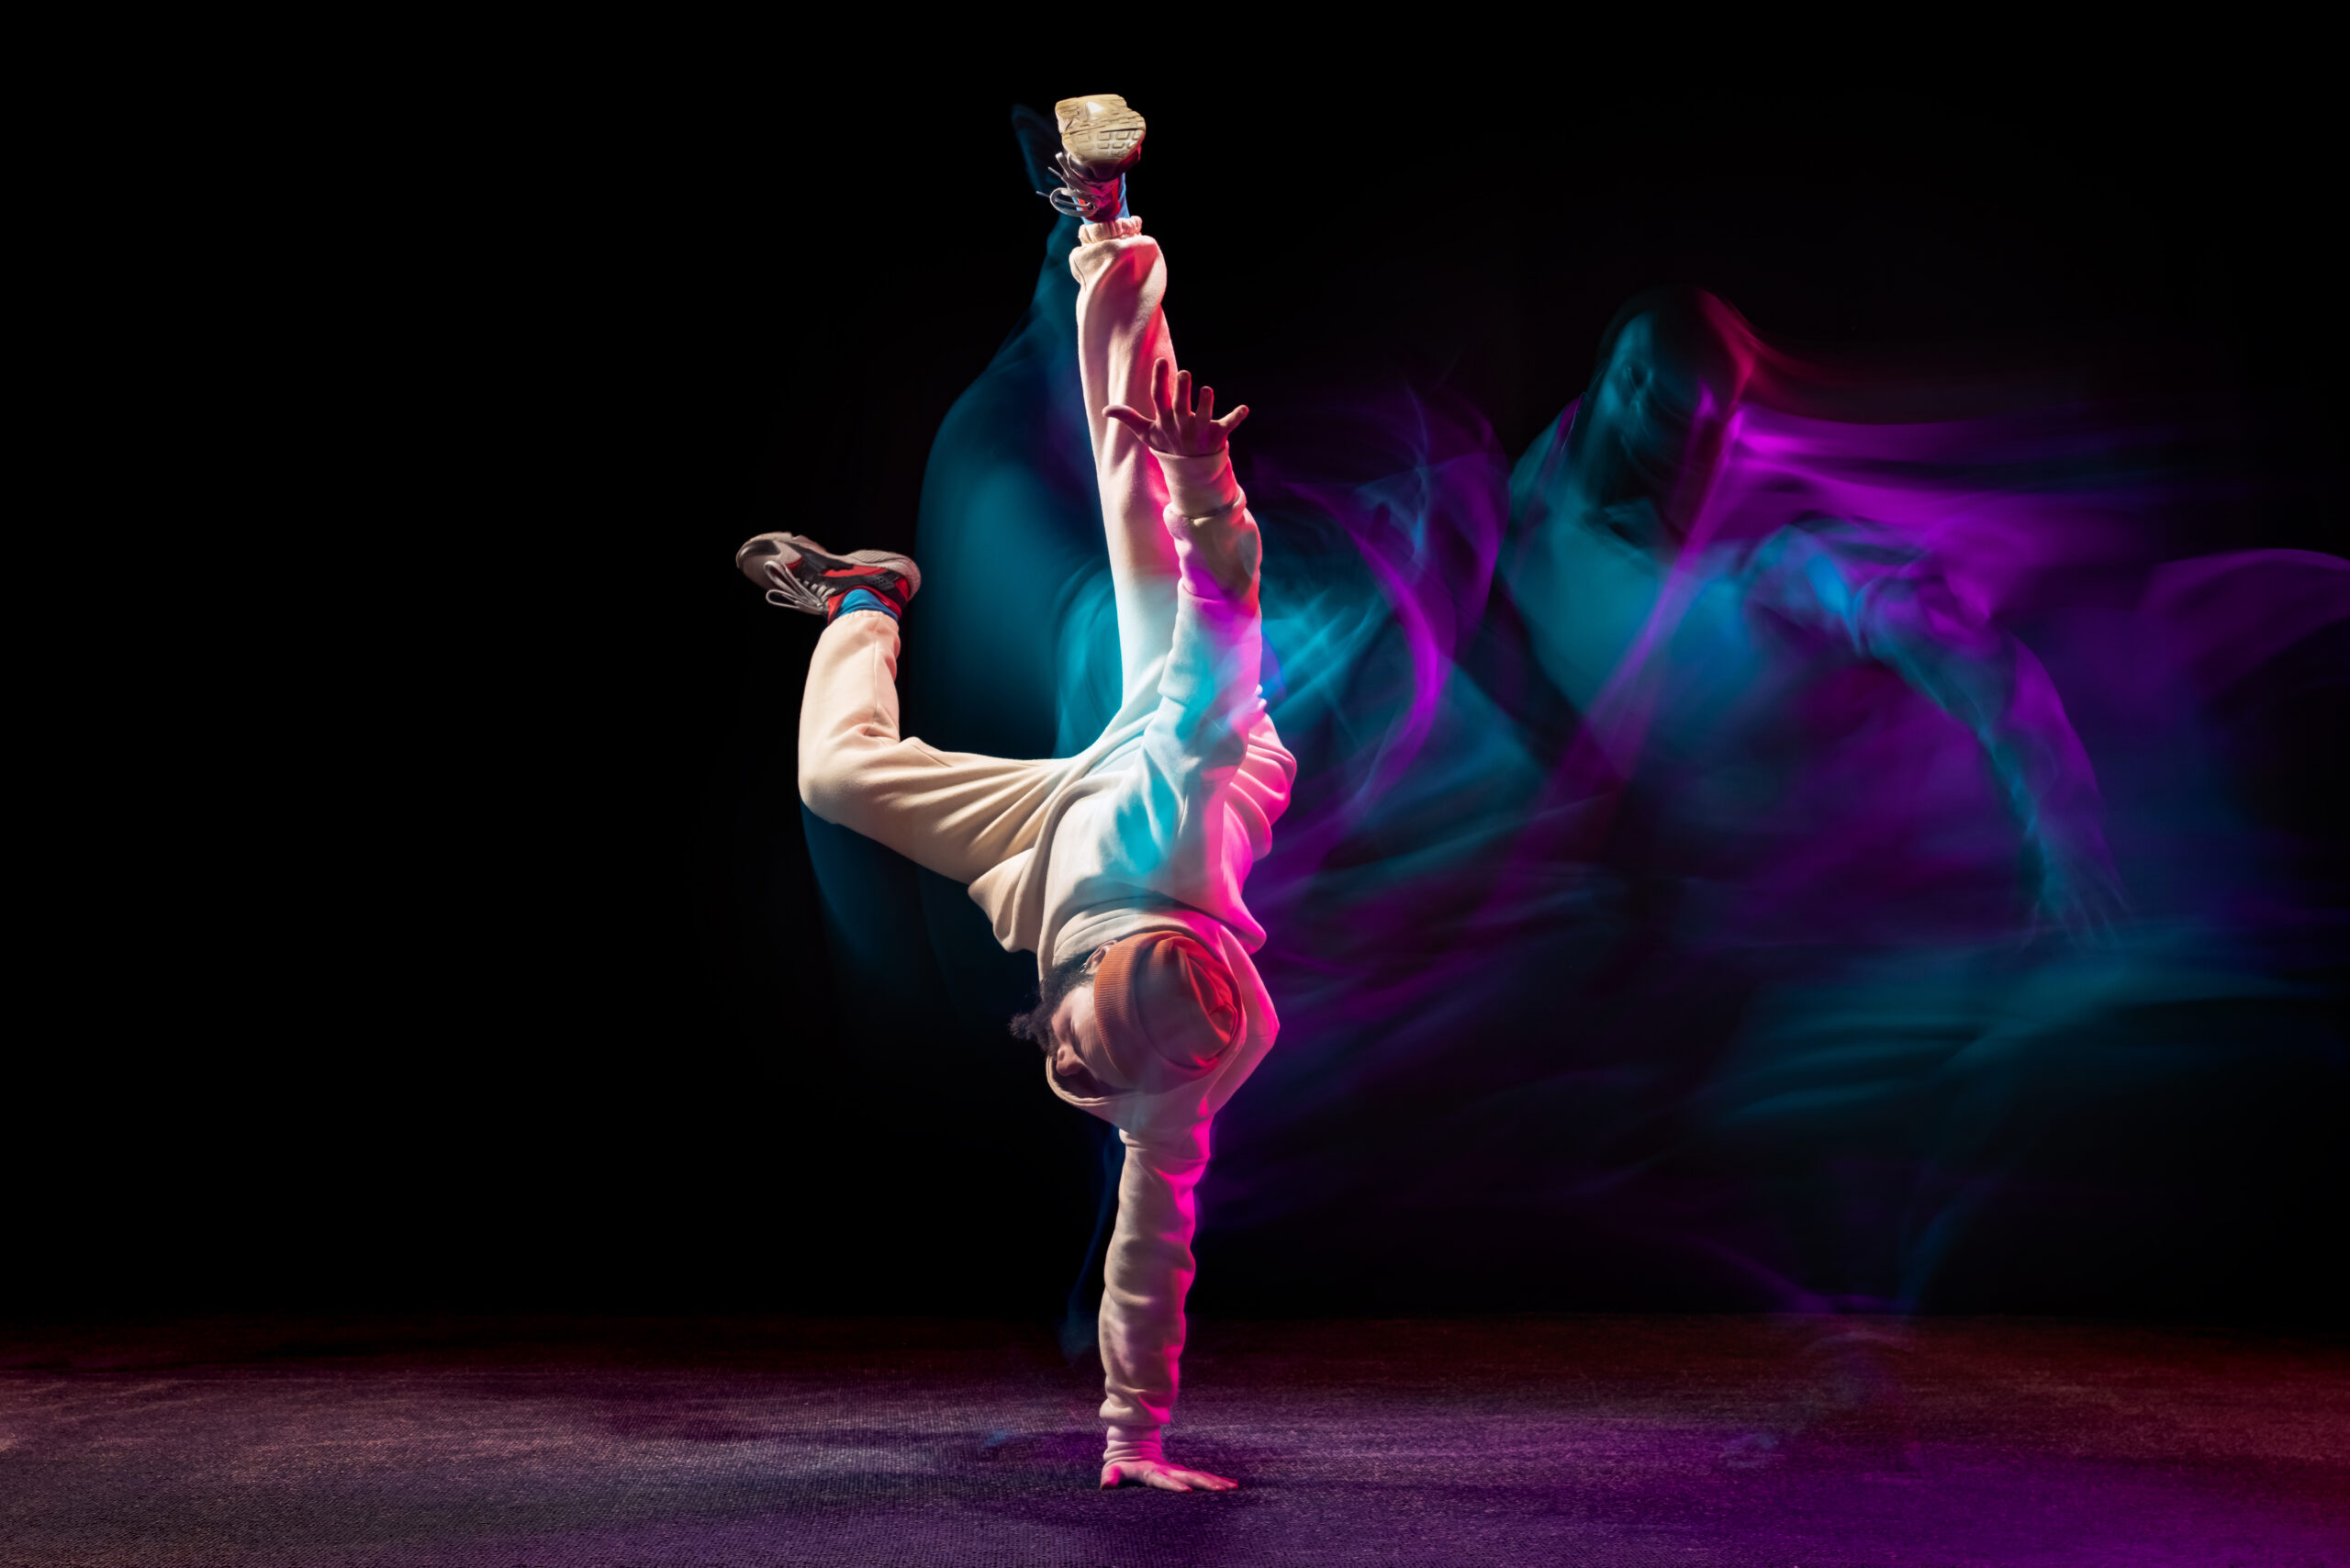 Young sportive man daancing breakdance isolared over black backgrounf in neon with mixed lights